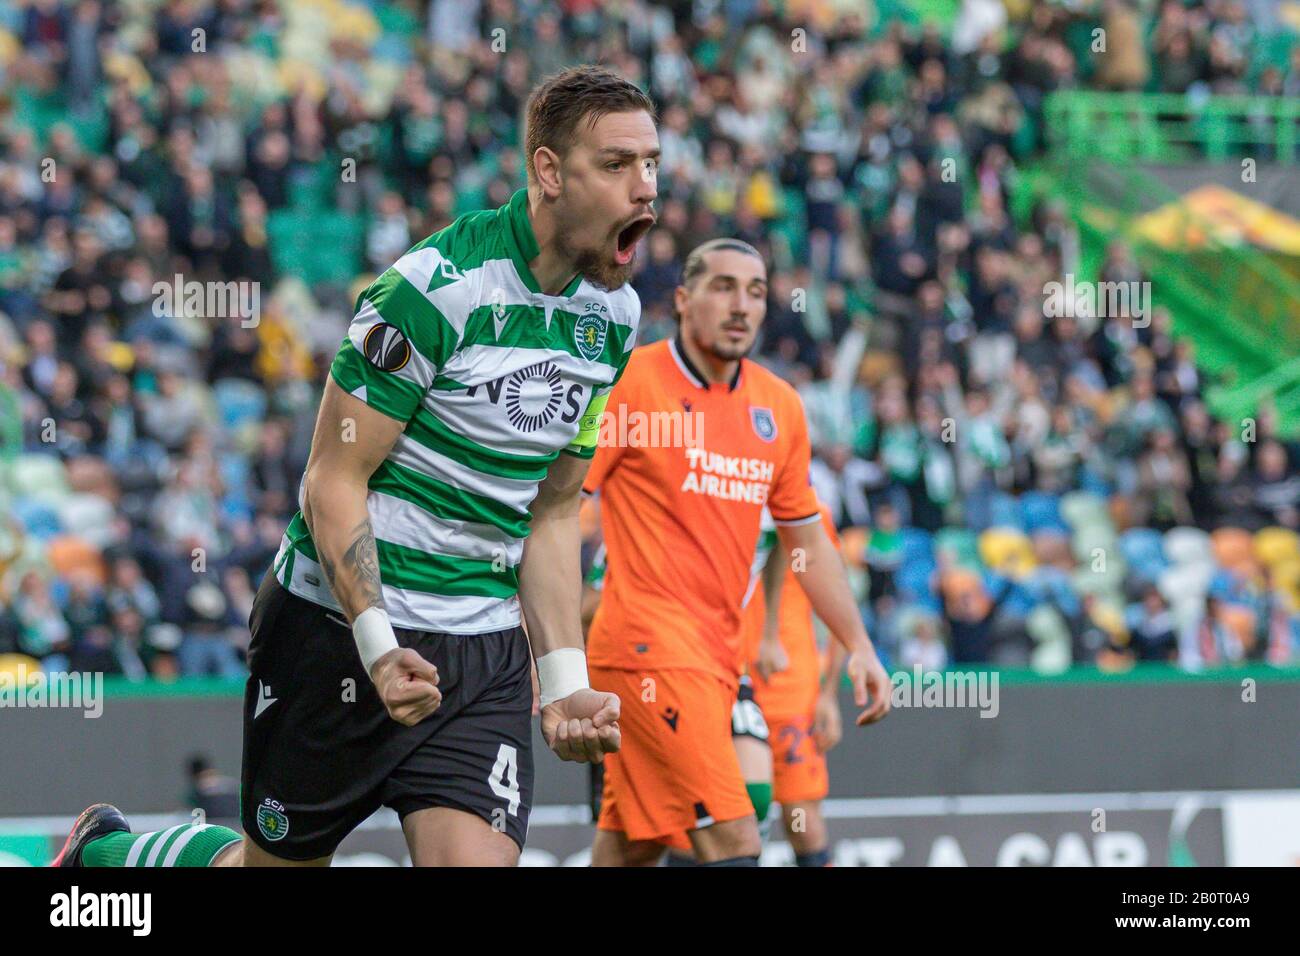 Lisbon, Portugal. 20th Feb, 2020. February 20, 2020. Lisbon, Portugal. Sporting's defender from Uruguay Sebastian Coates (4) celebrating after scoring a goal during the game of the UEFA Europa League, Sporting CP vs Istanbul Basaksehir Credit: Alexandre de Sousa/Alamy Live News Stock Photo